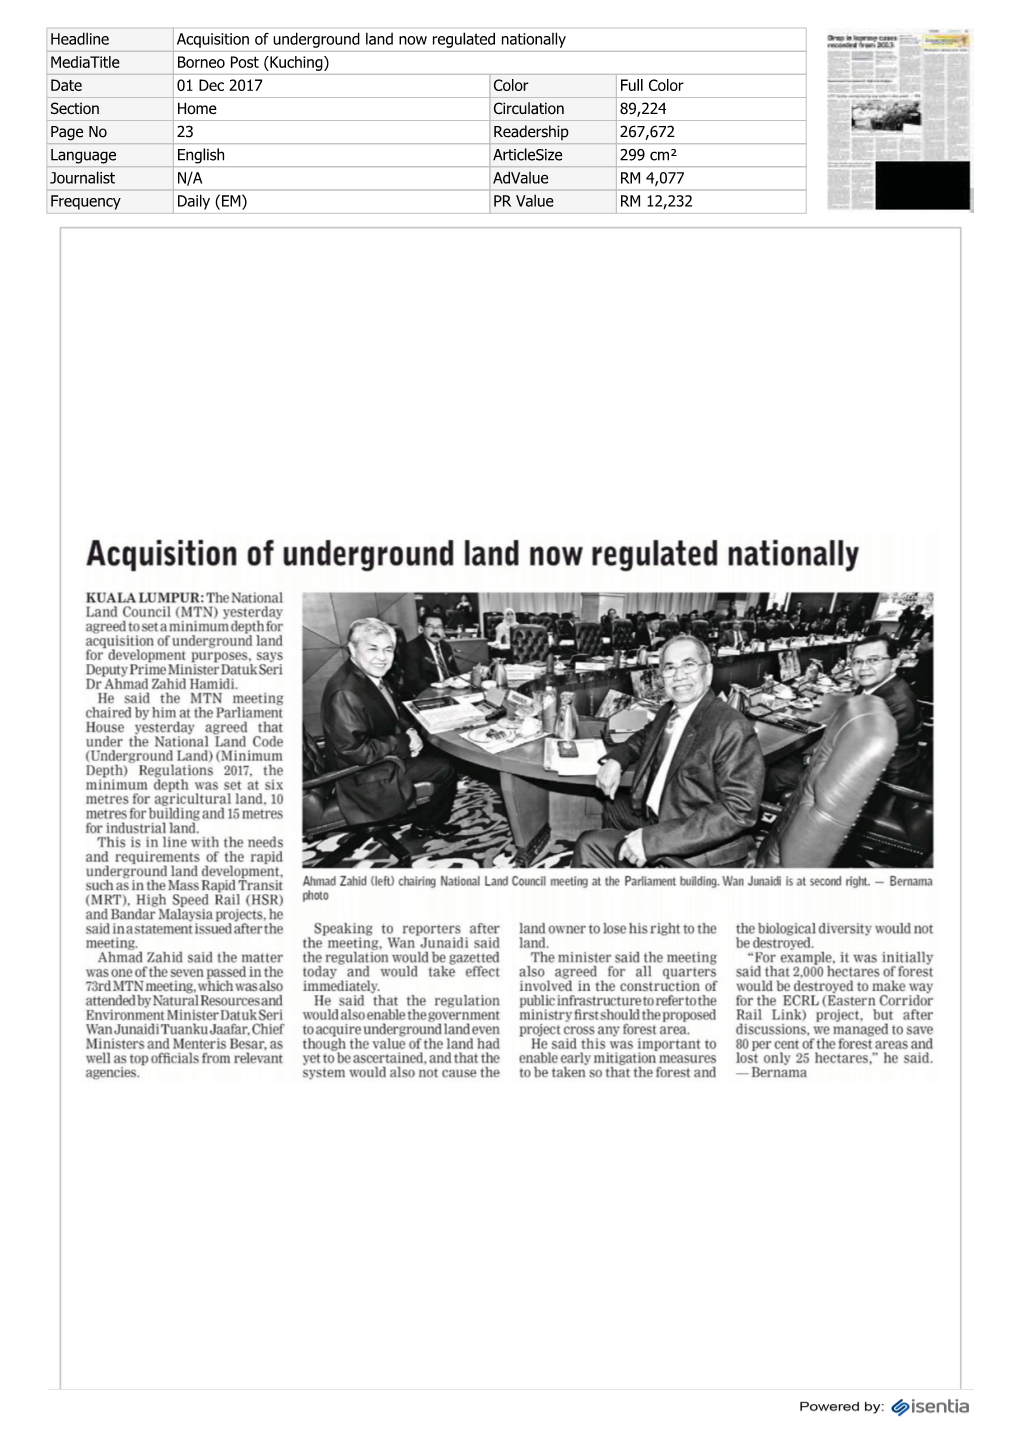 Acquisition of Underground Land Now Regulated Nationally